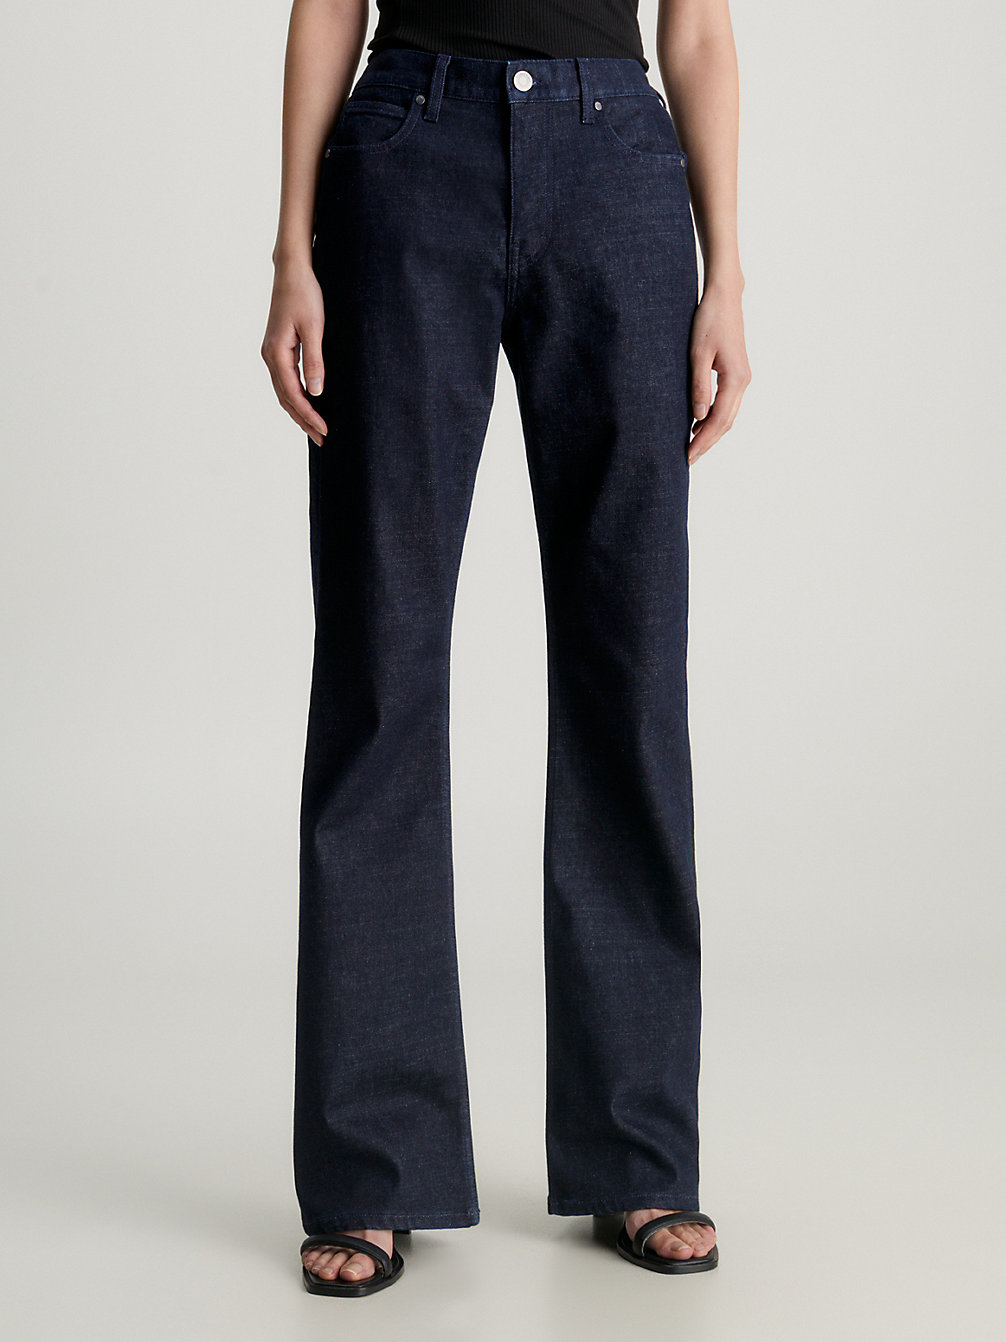 DENIM RINSE > Mid Rise Relaxed Bootcut Jeans > undefined Women - Calvin Klein